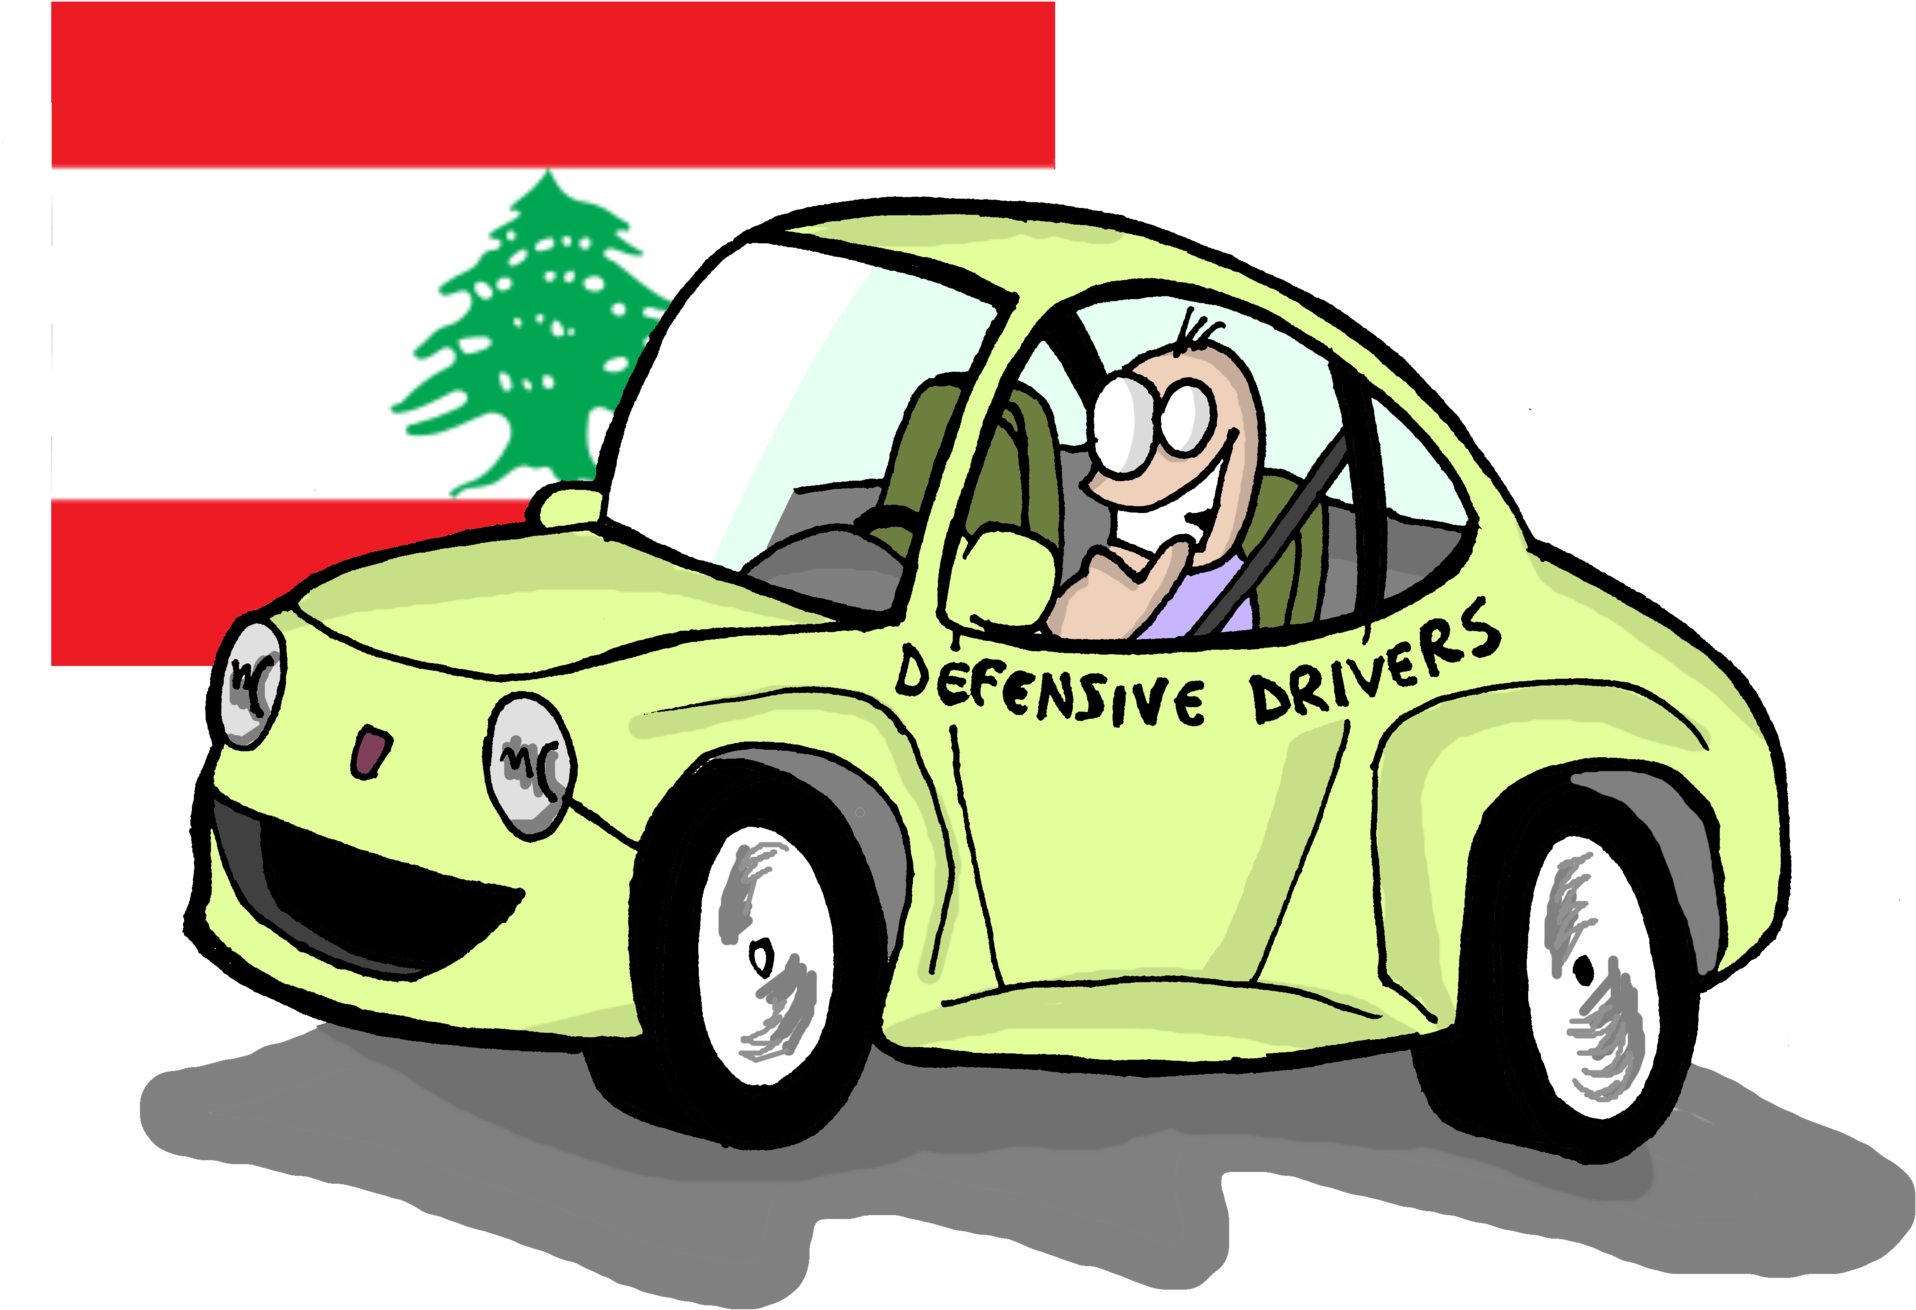 Lebanese Youth Train 'defensive Drivers' To Curb Car - Lebanese Youth Train 'defensive Drivers' To Curb Car (2500x1748)